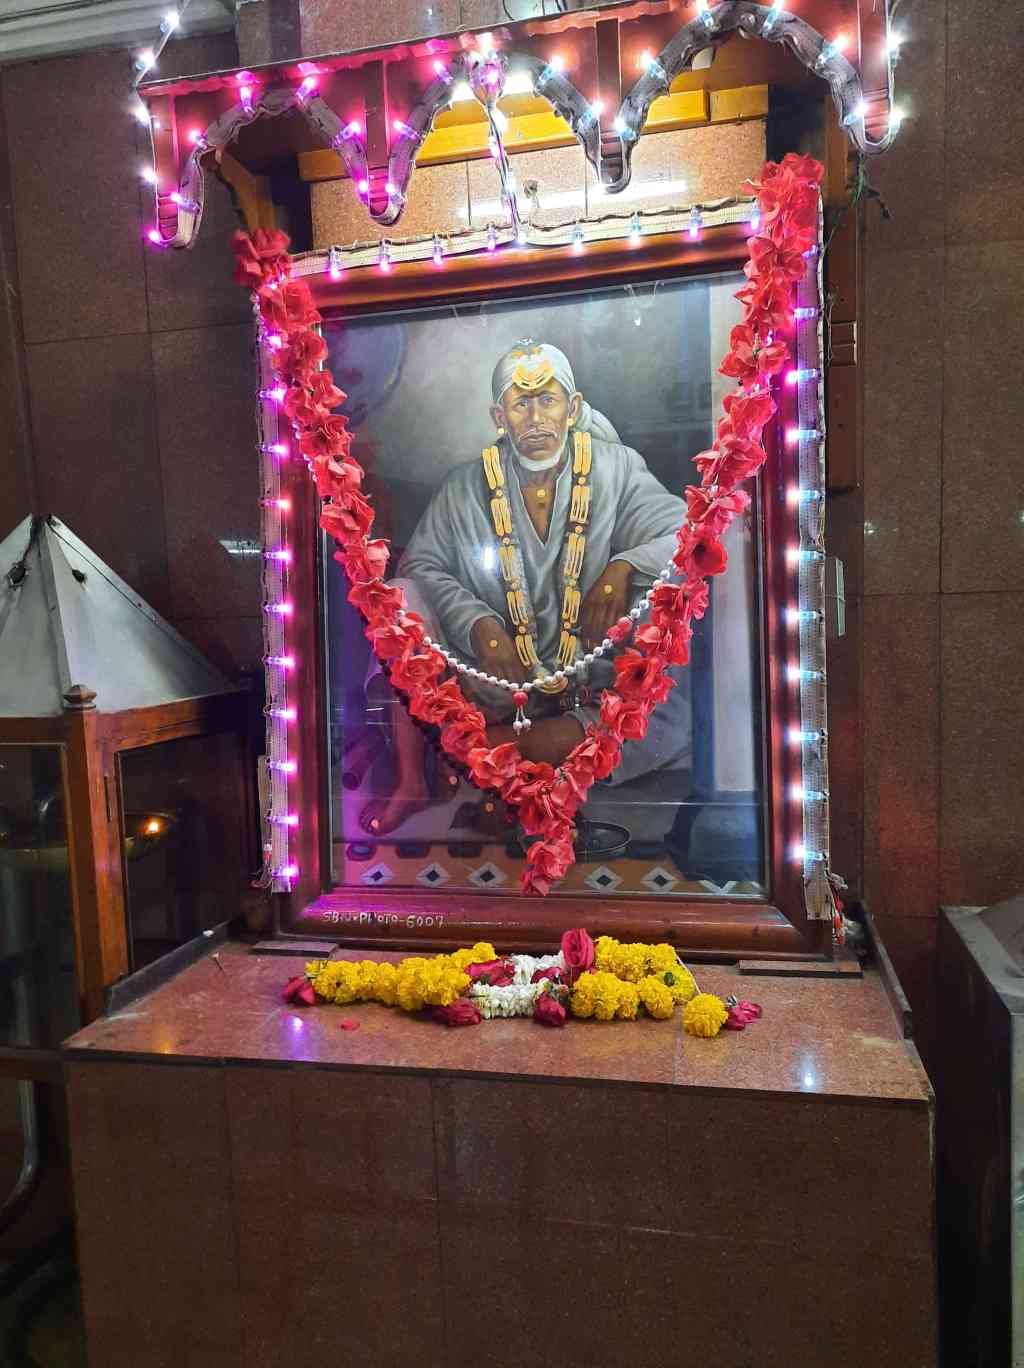 The hand mill of Shirdi Saibaba has two stones : Devotion and Hardwork